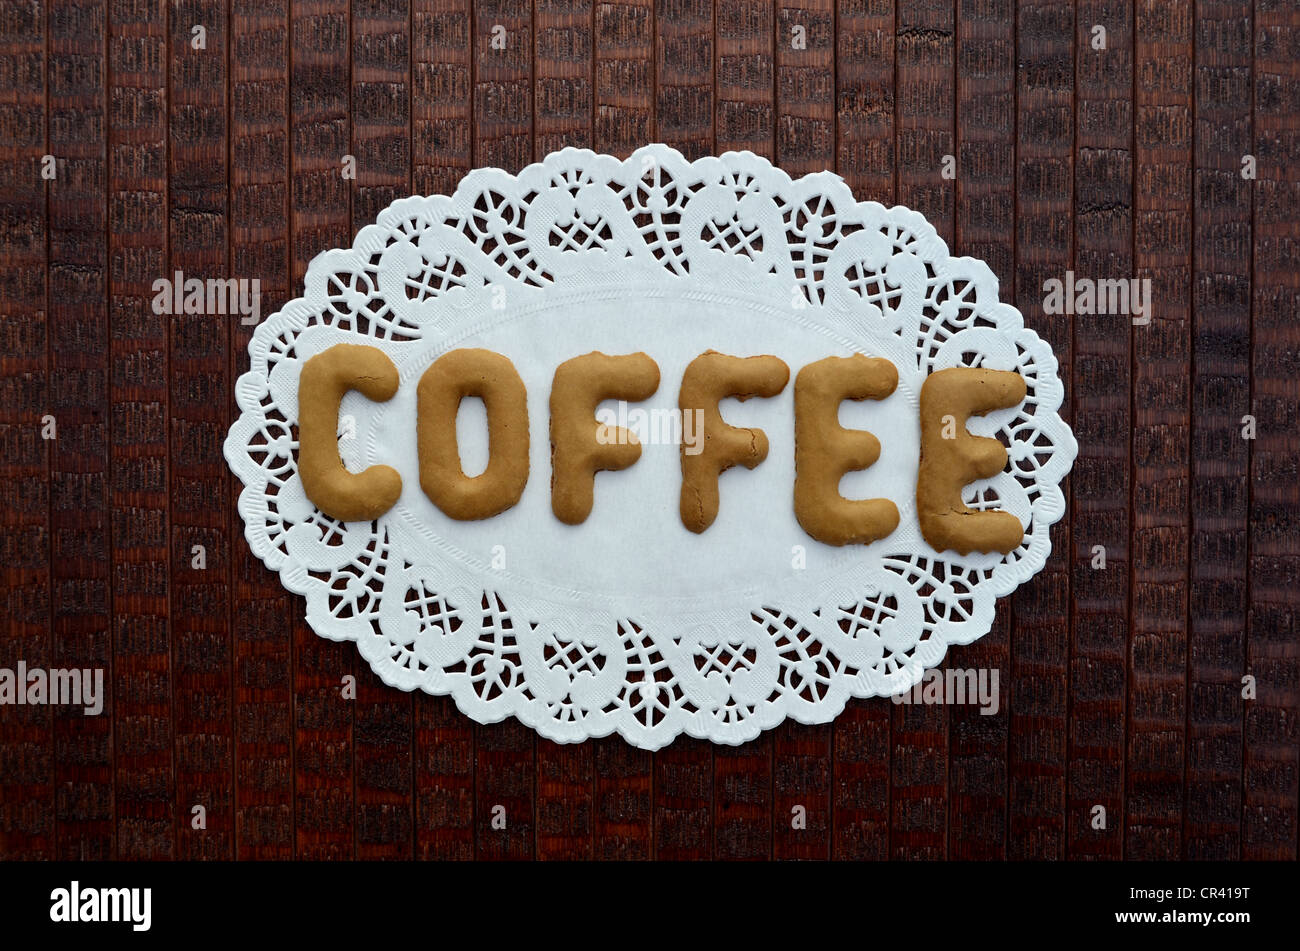 Coffee, written with alphabet biscuits on a paper doily Stock Photo